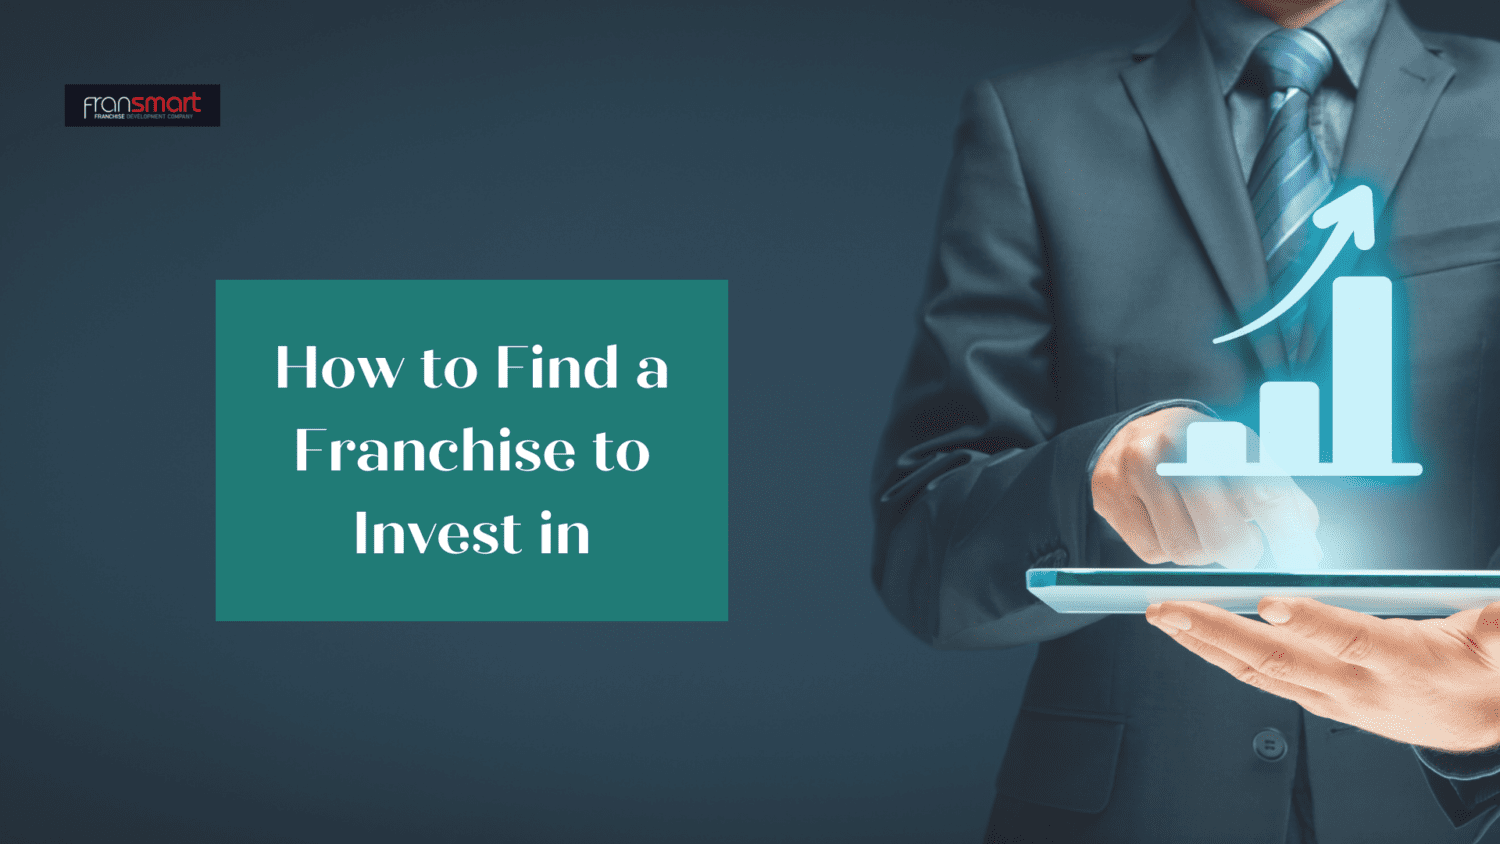 How to Find a Franchise to Invest in